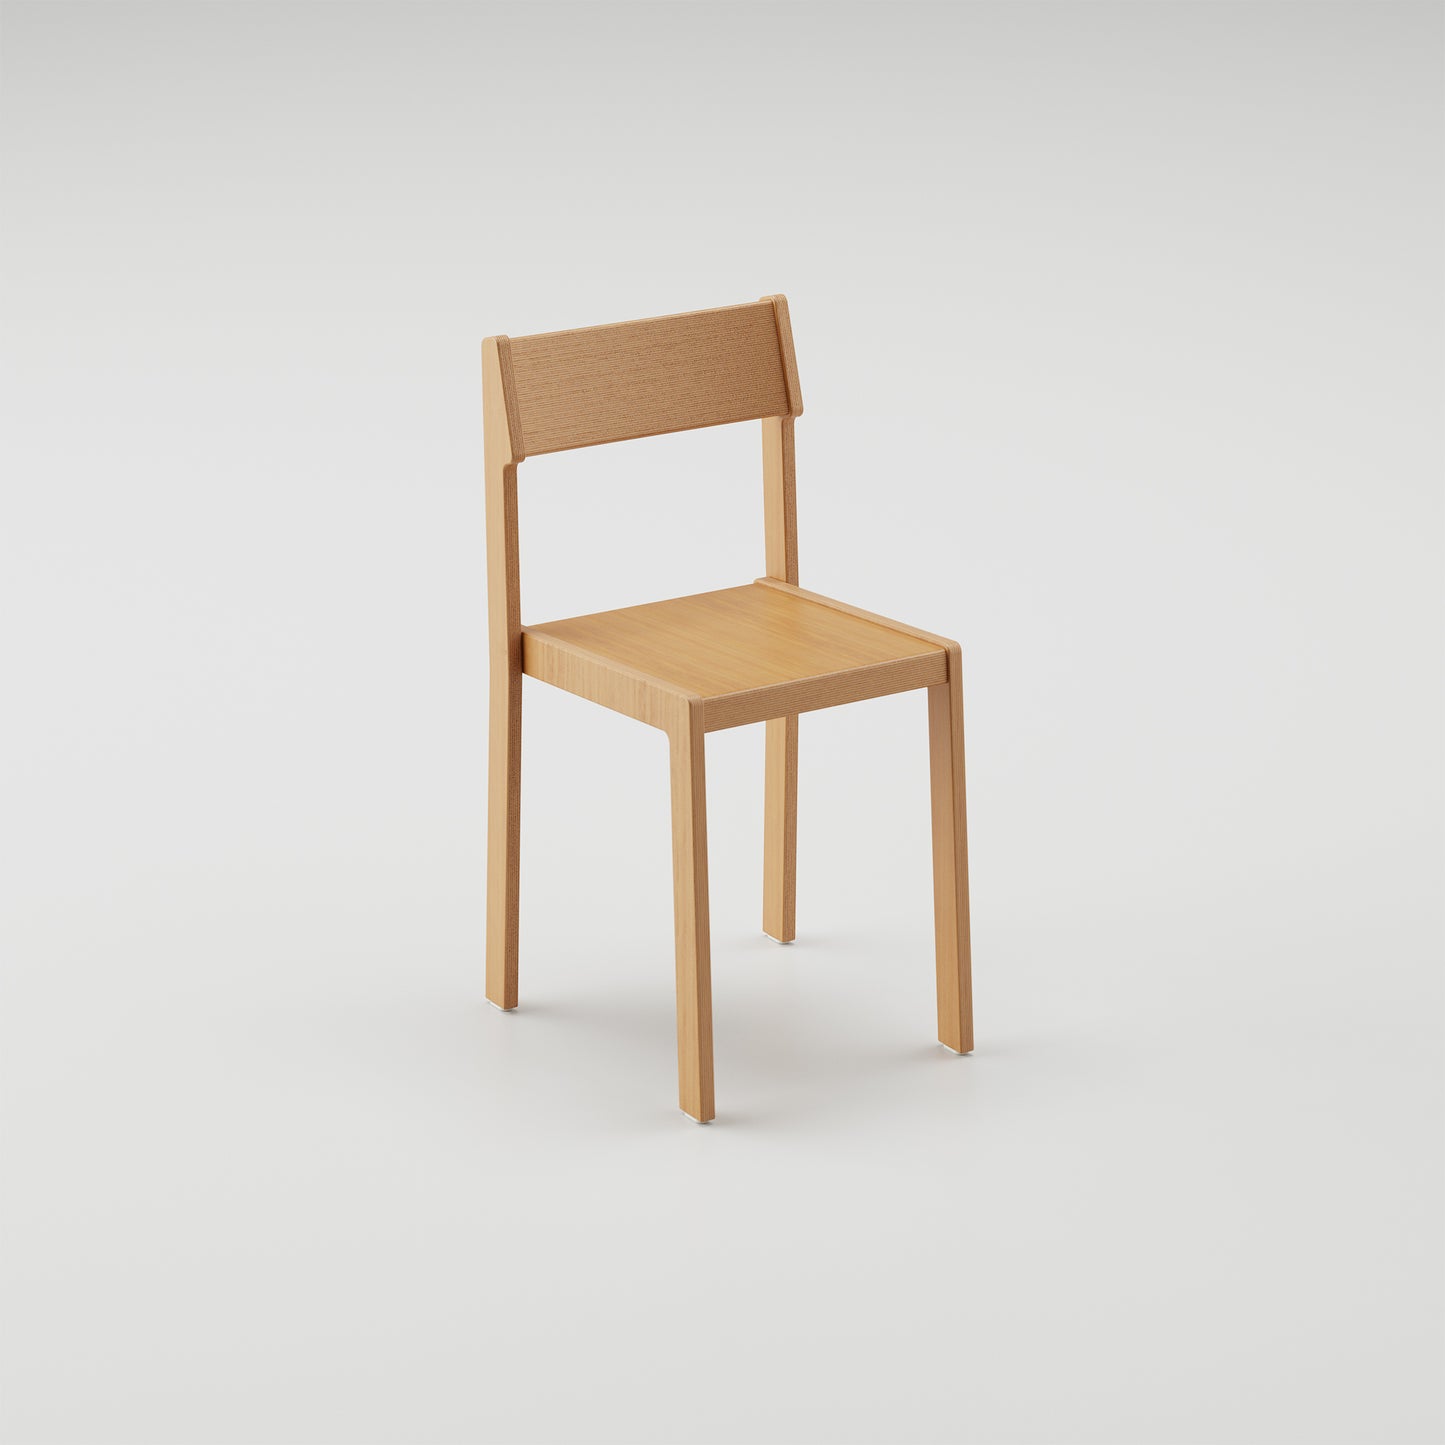 ARRIVAL CHAIR by studio re.d - REDUCE.DESIGN